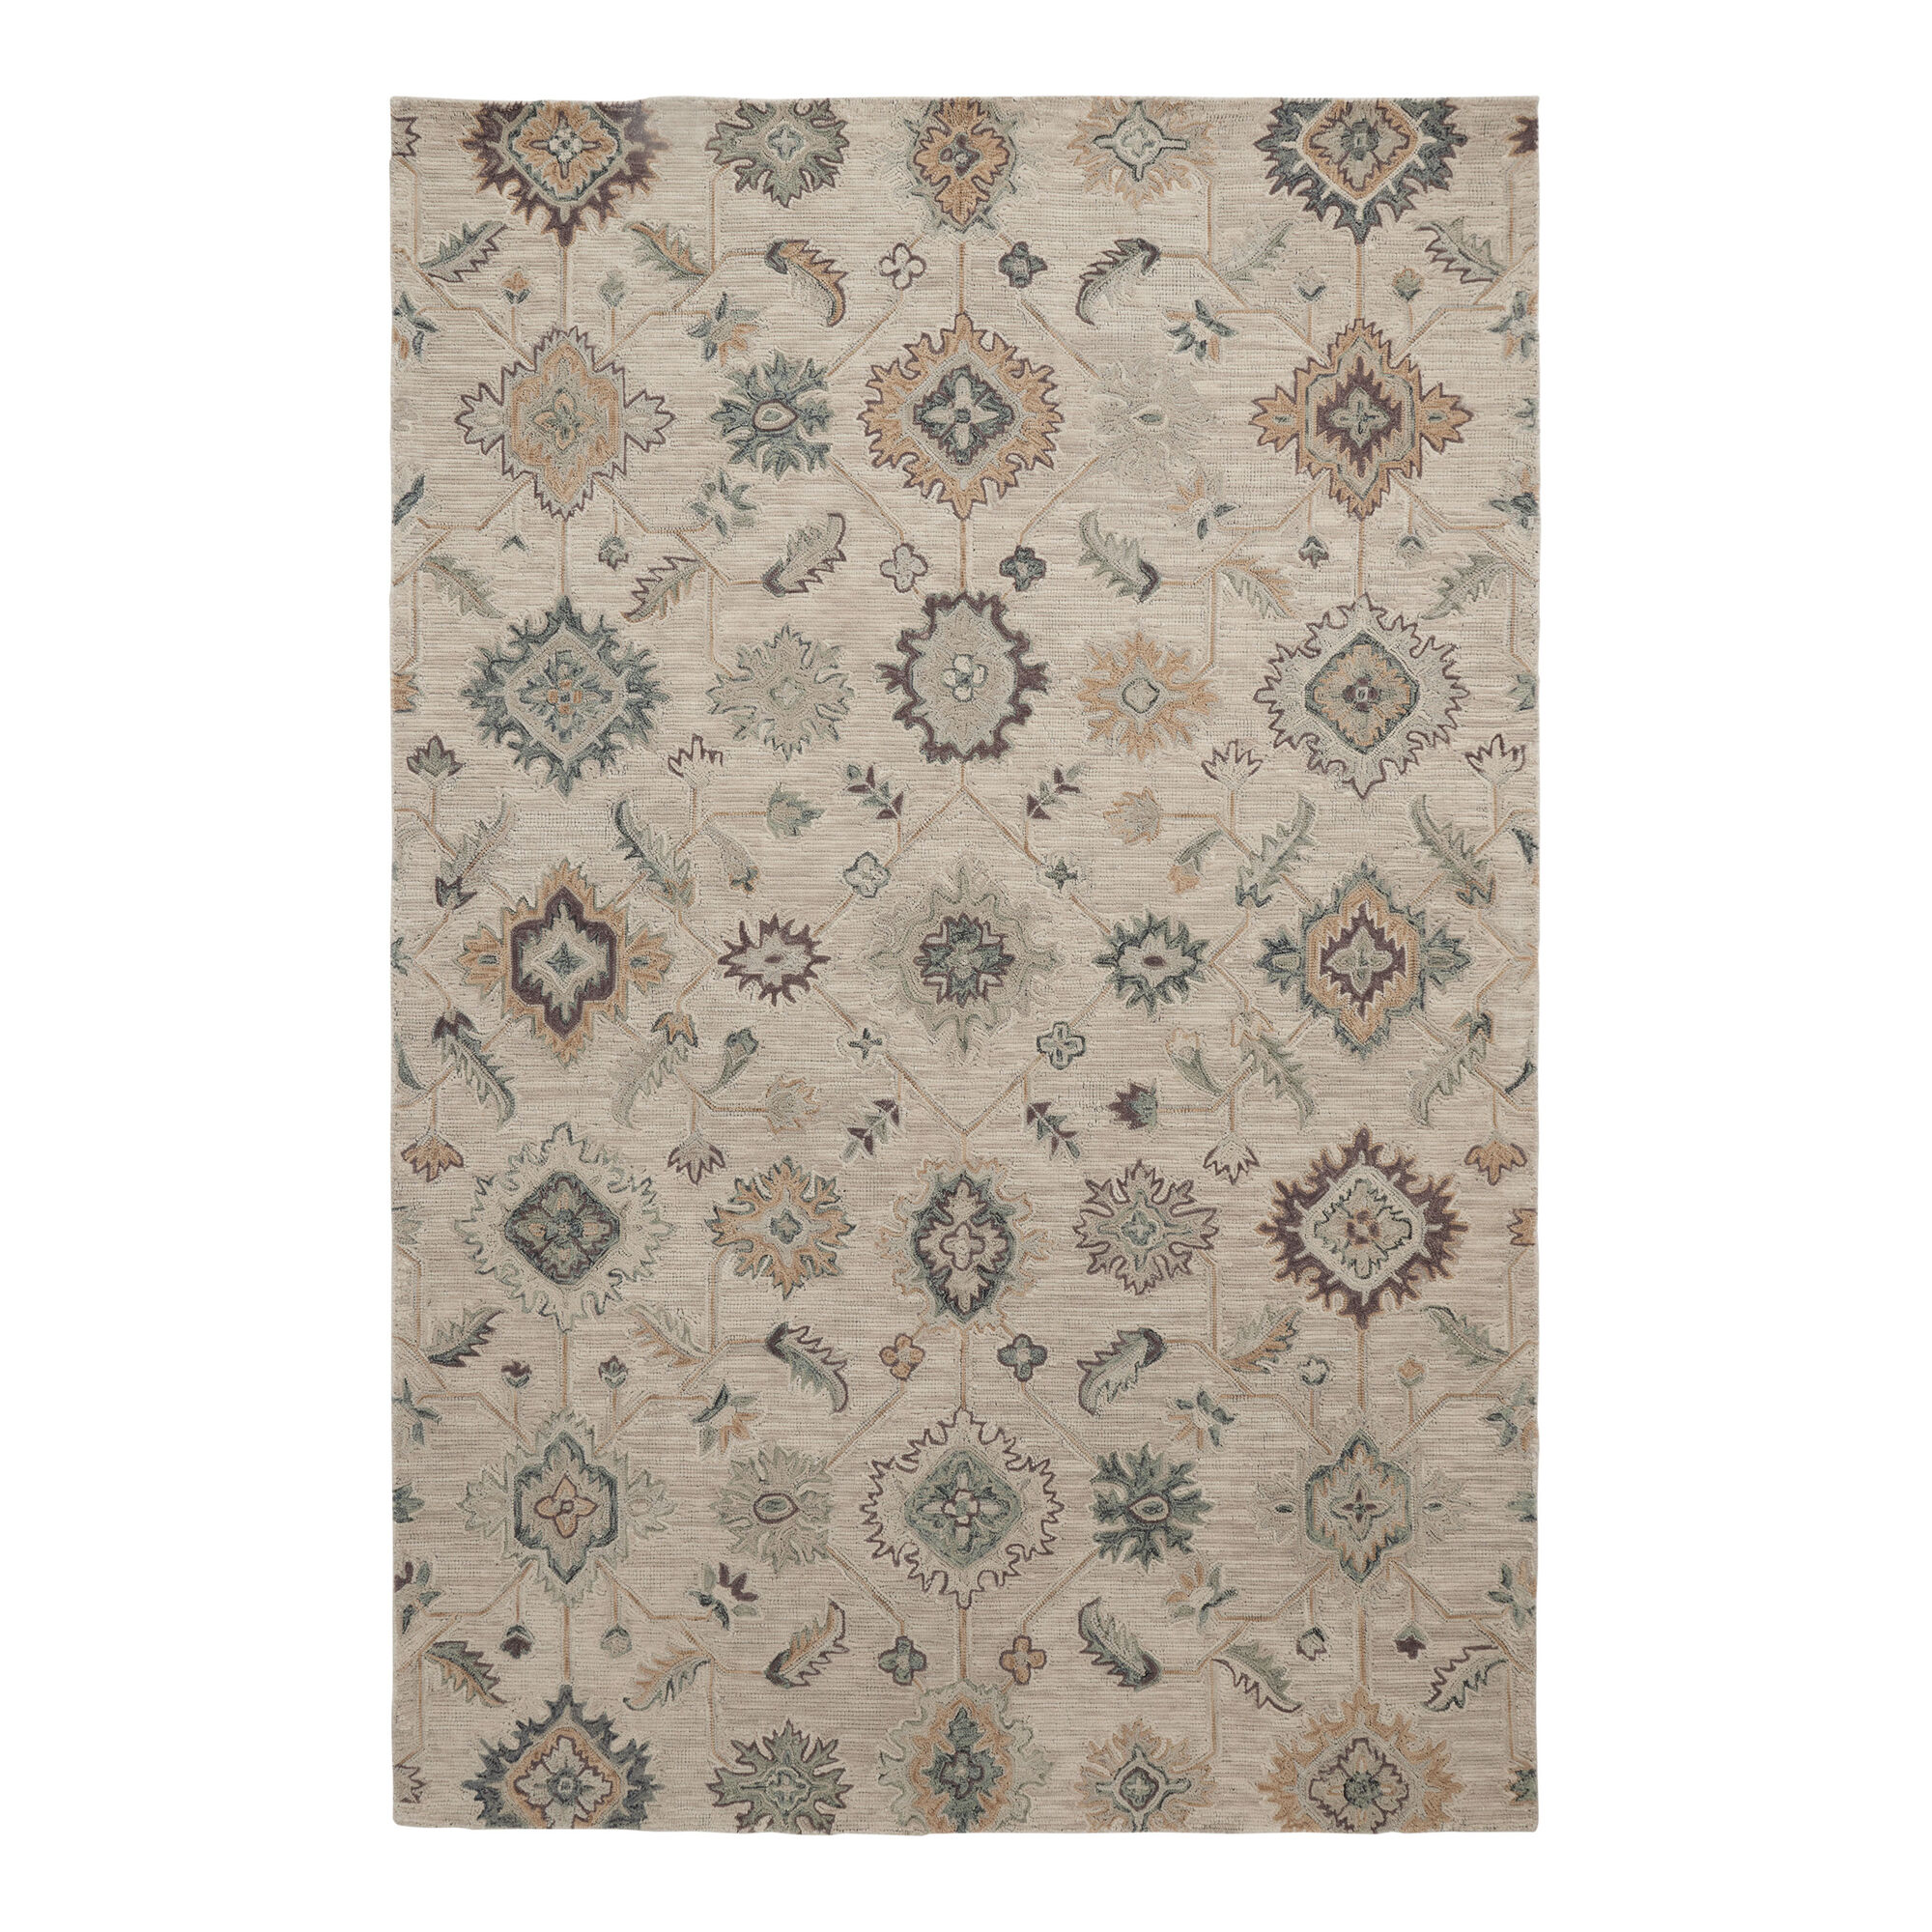 Stanley Floral Handmade Tufted Wool Green/Beige Area Rug August Grove Rug Size: Rectangle 8'6 x 11'6